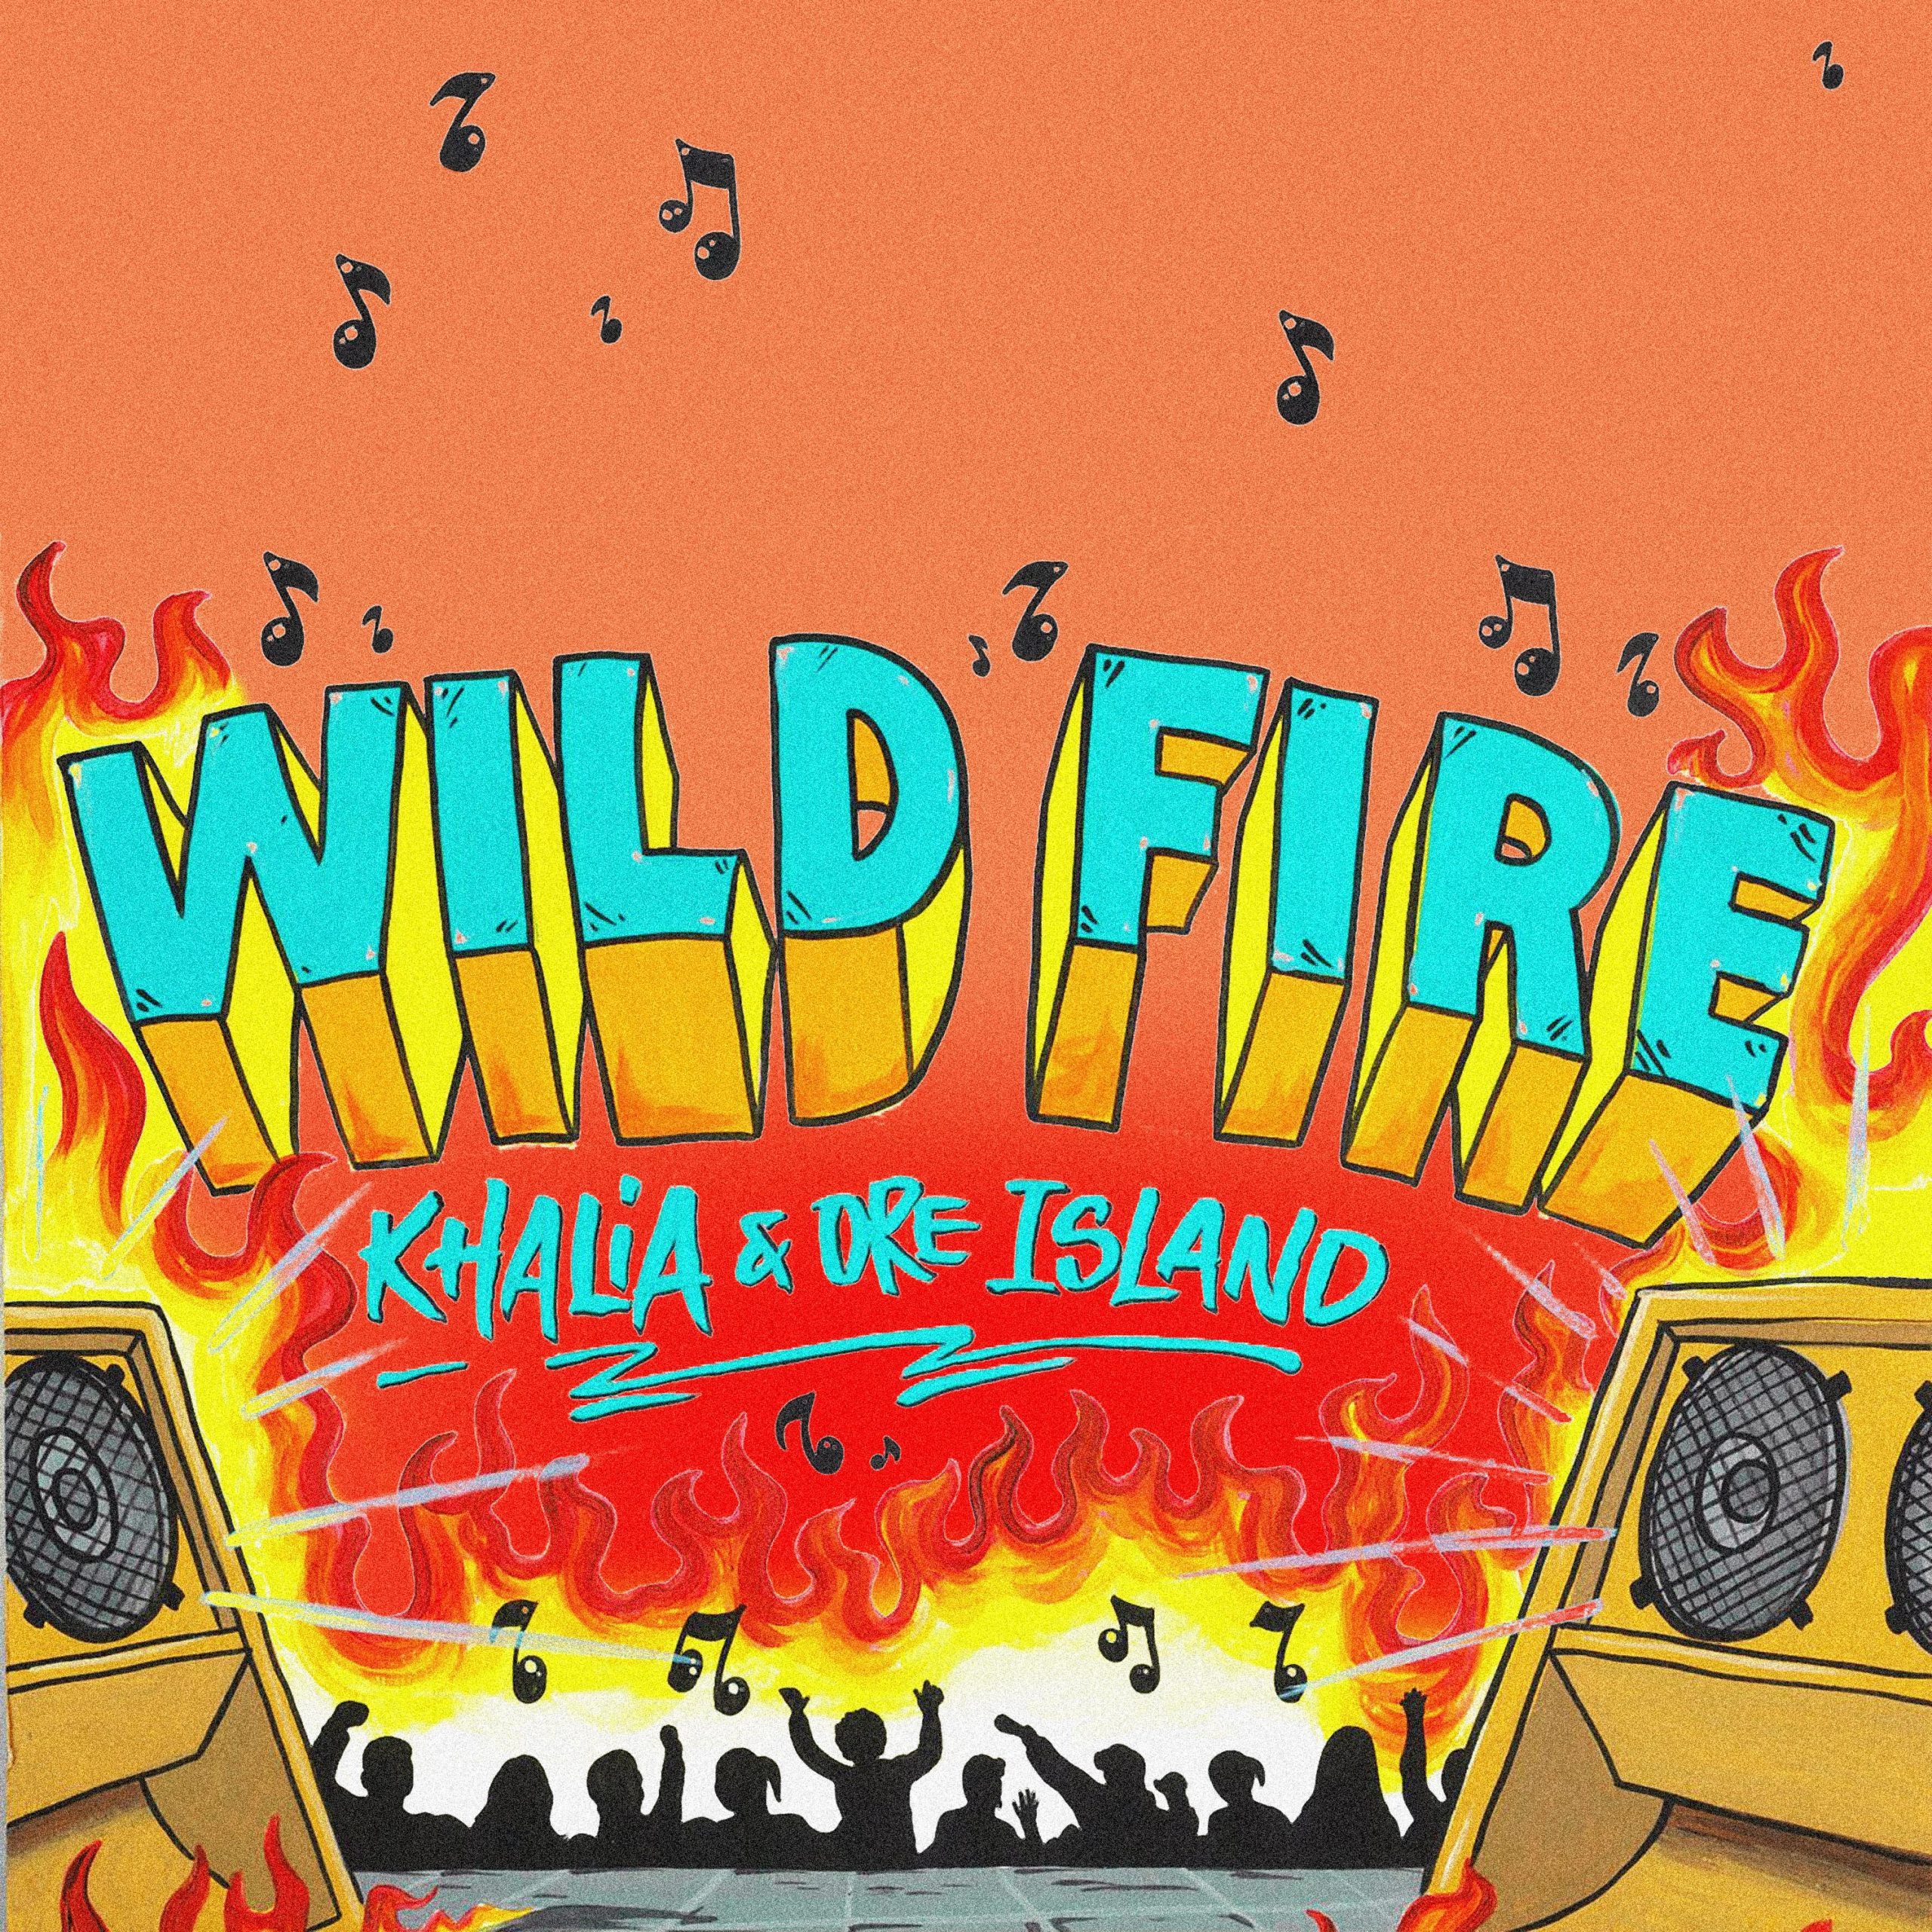 With a high-value production and universal vibe, ‘Khalia’ teams up with ‘Dre Island’ to release the brand new collab single ‘Wild Fire”